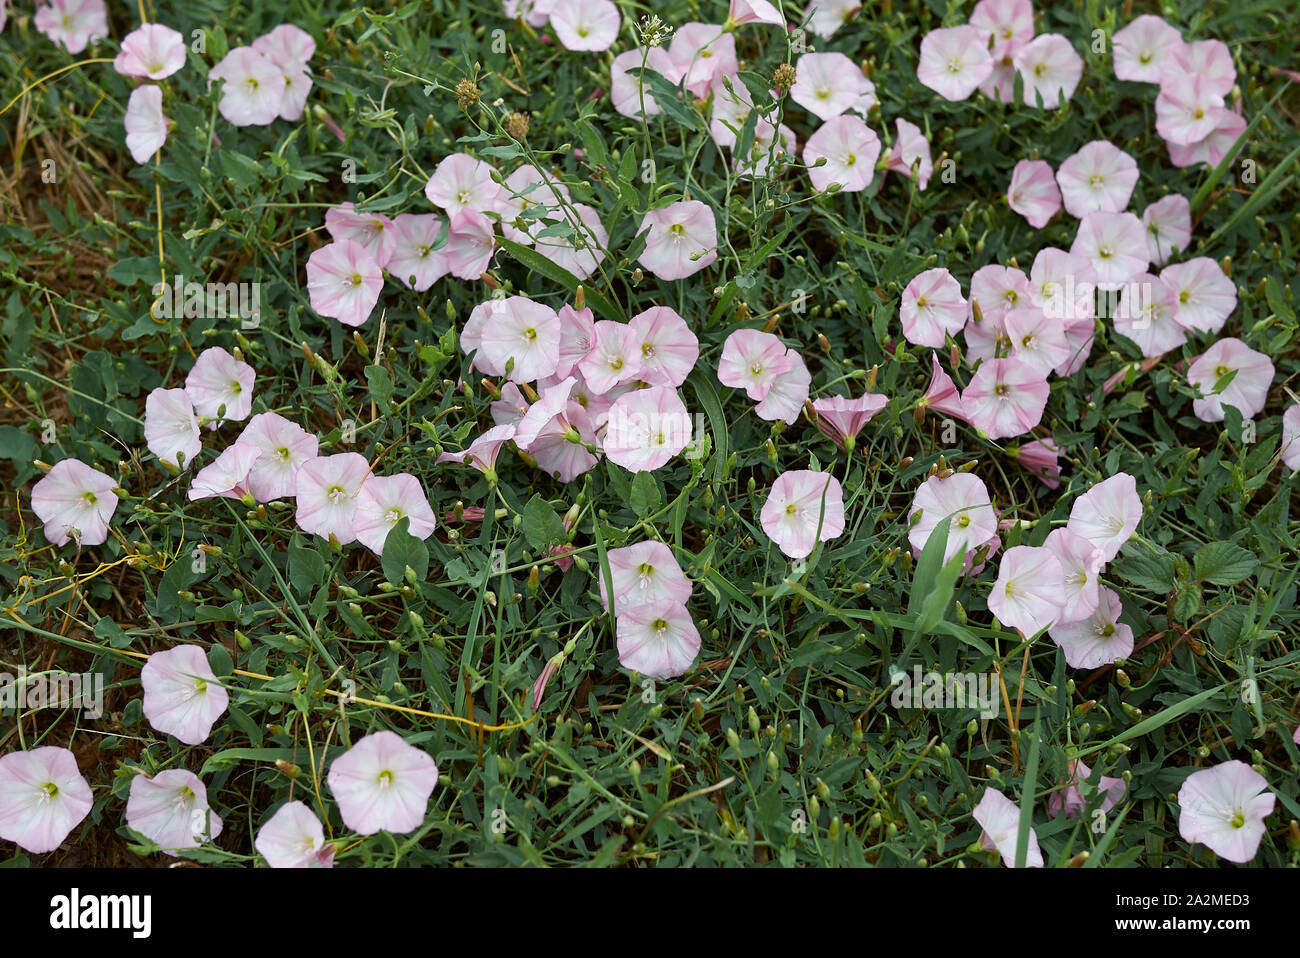 Convolvulus arvensis whith pink and white flowers Stock Photo